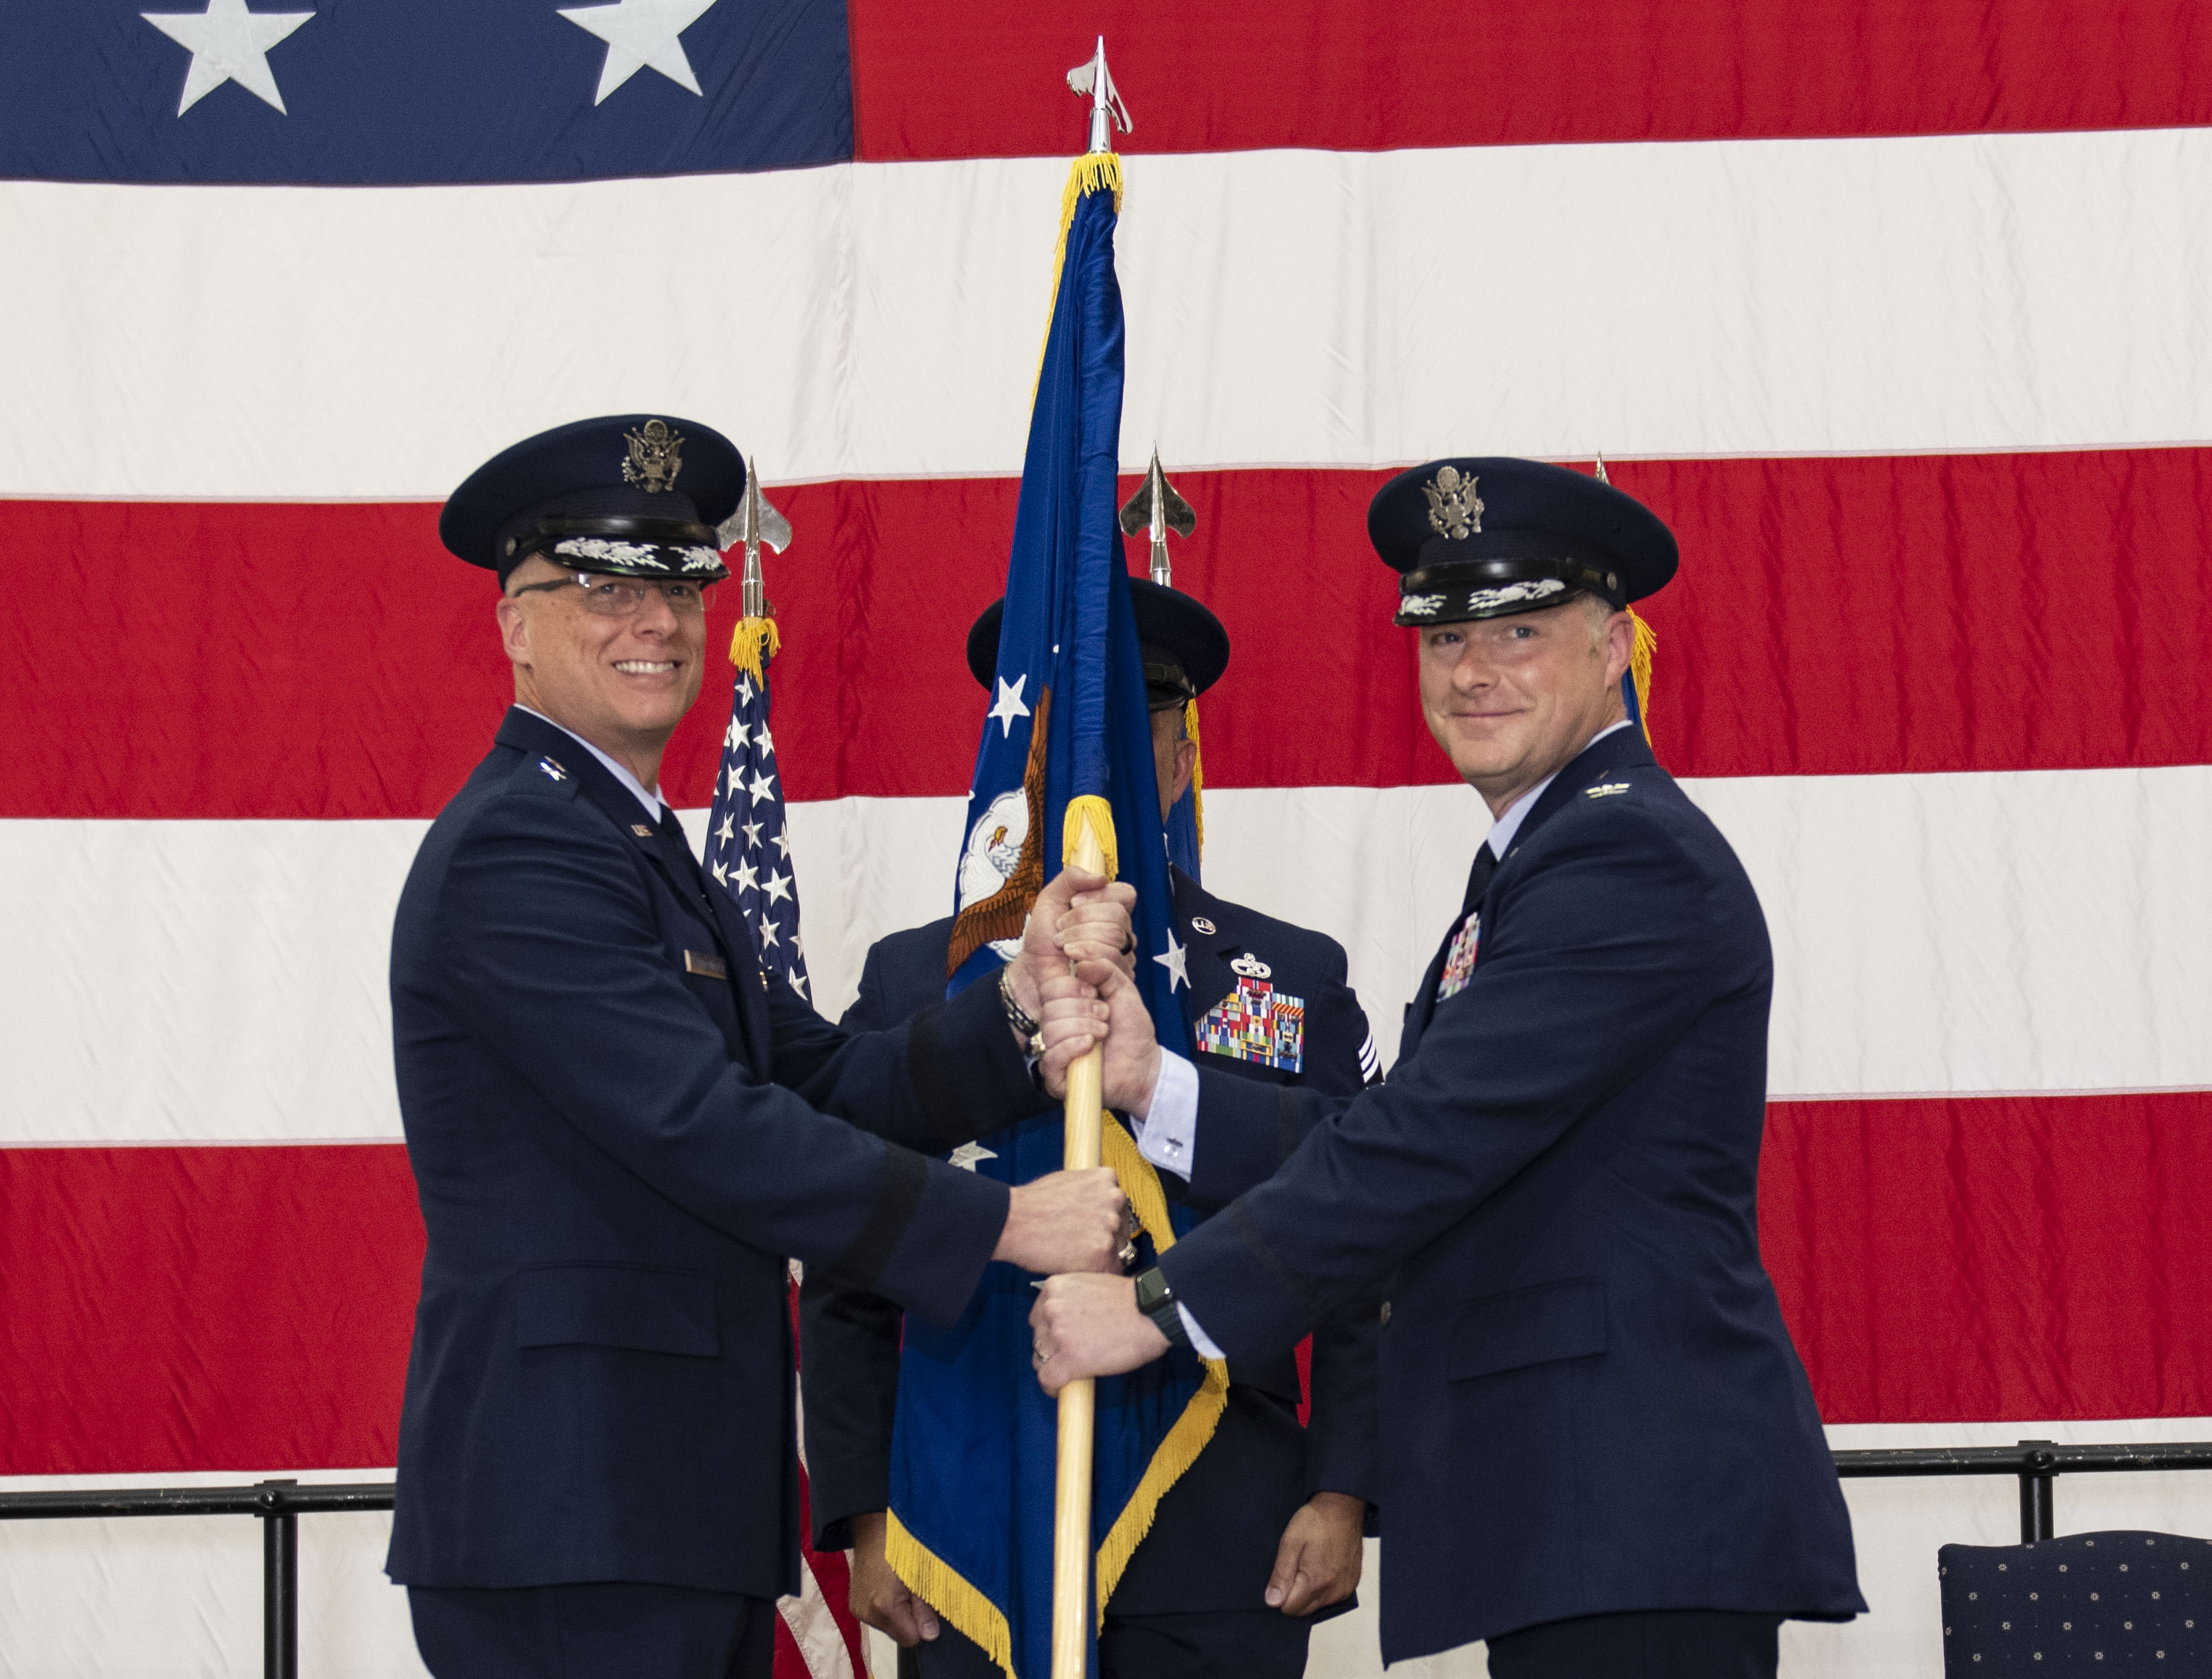 In good hands”: Diehl takes command of 509th Bomb Wing at Whiteman